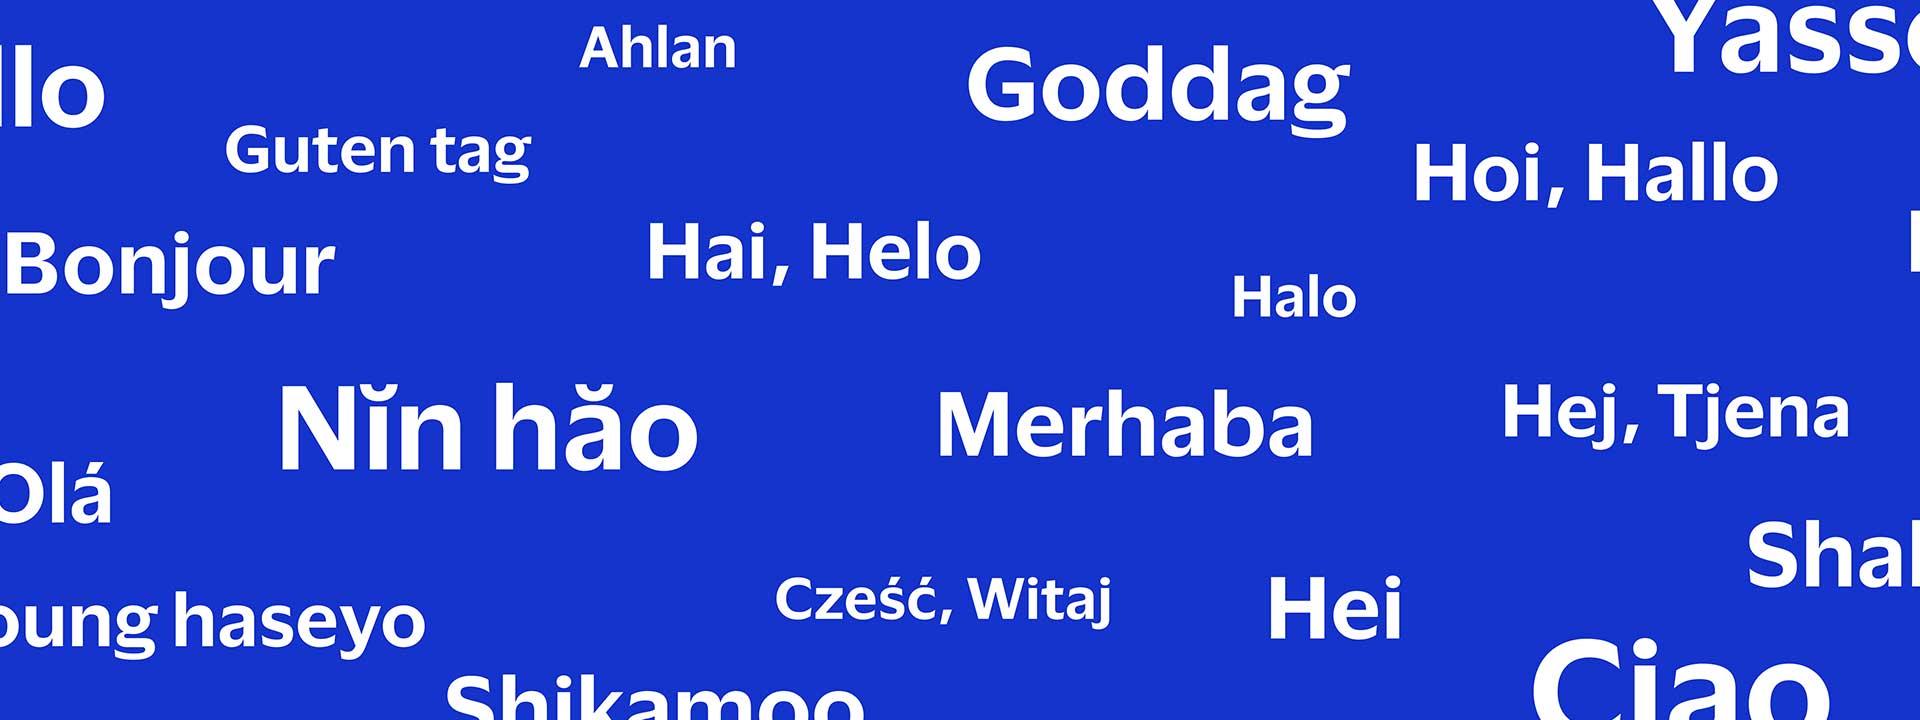 Hello messages in different languages.